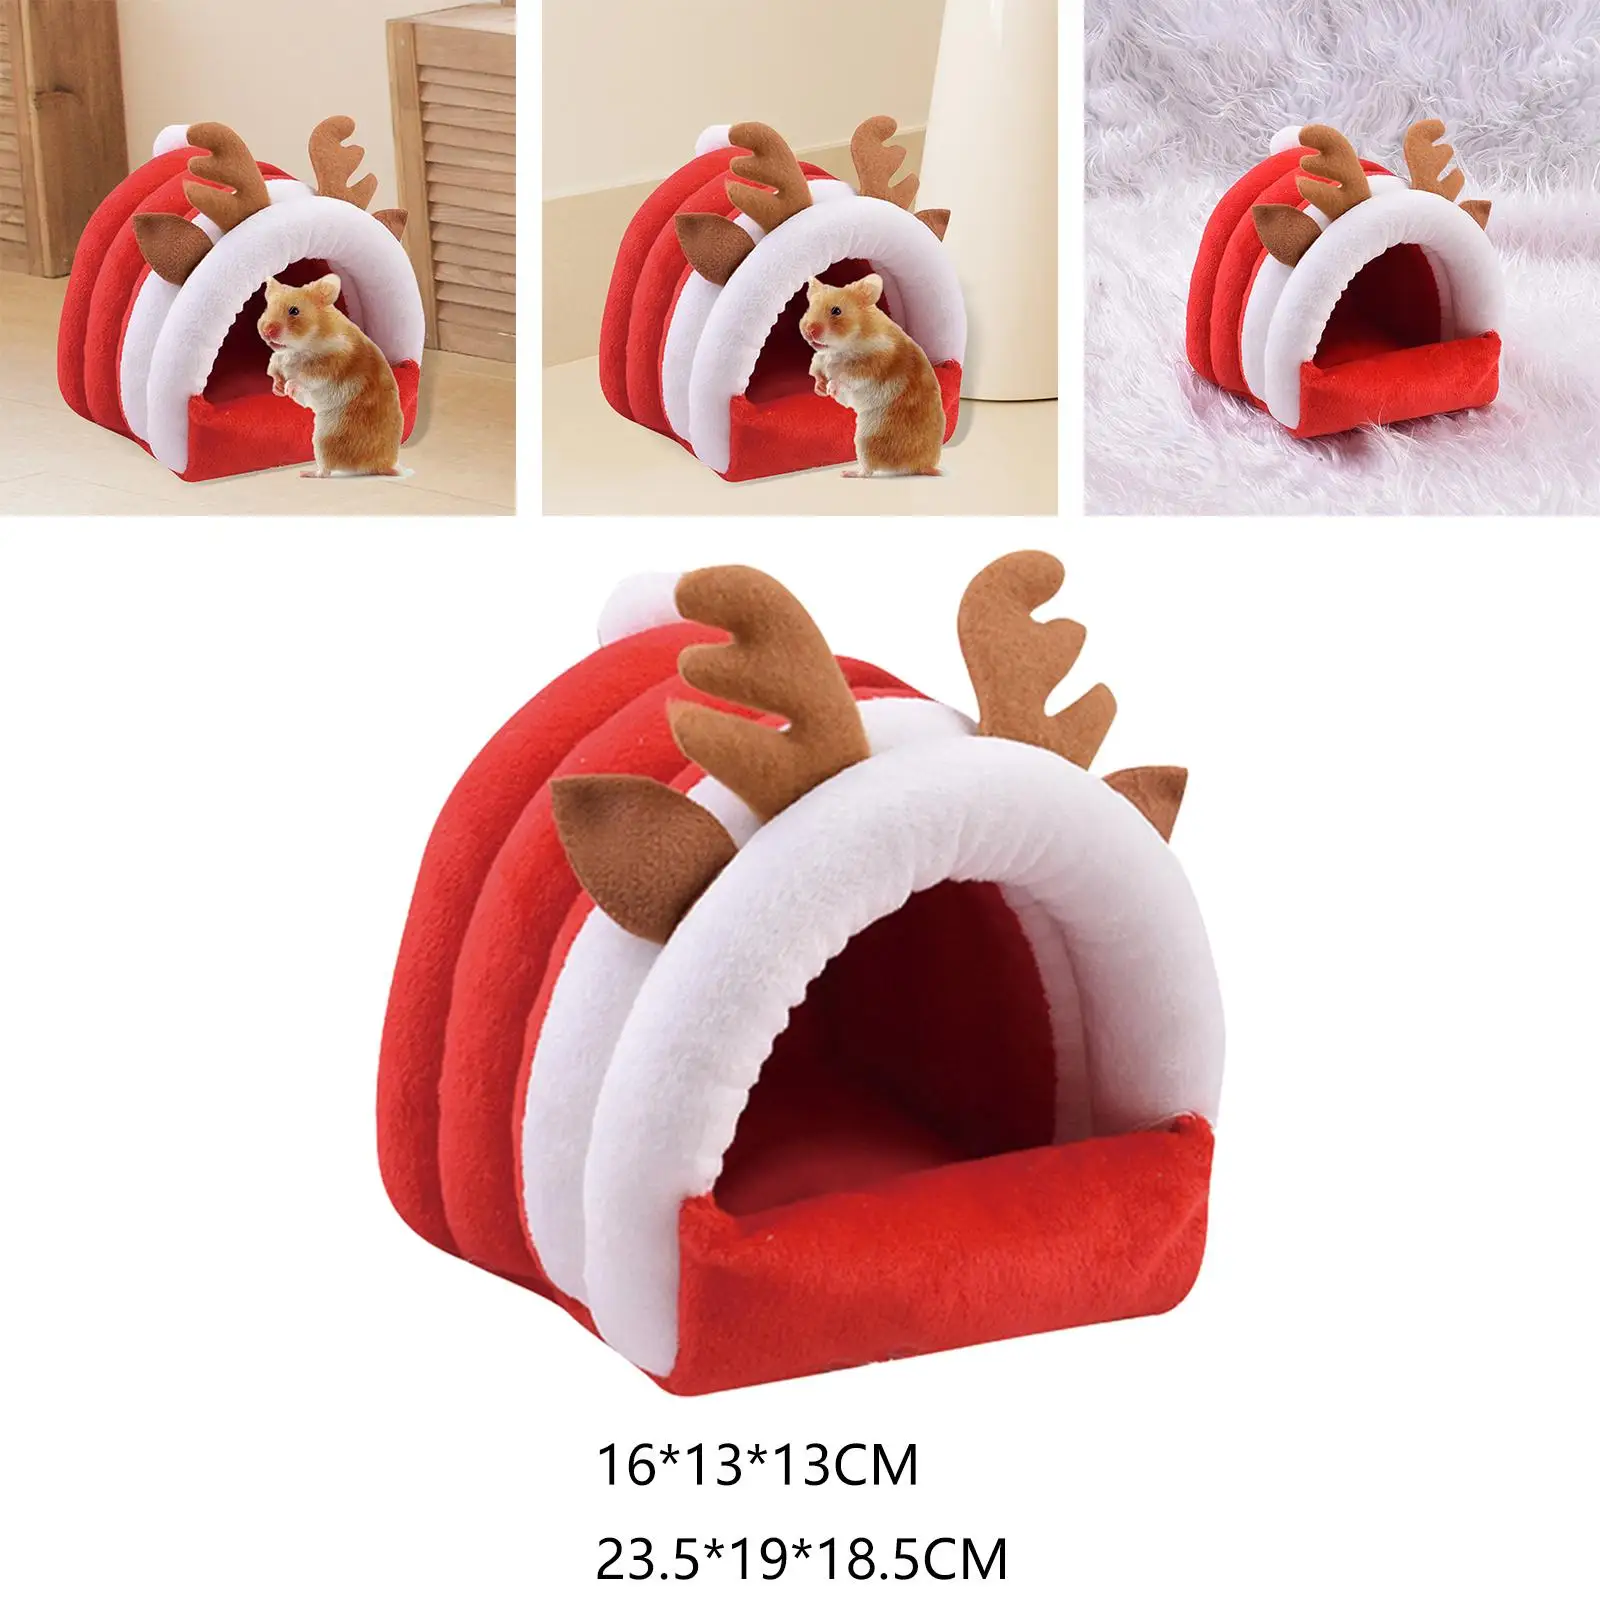 Small Pet Guinea Bed Hamster House Warm Accessories Basket Sleeping Bag Bedding for Mice Rabbit Ferrets Hedgehog Bunny